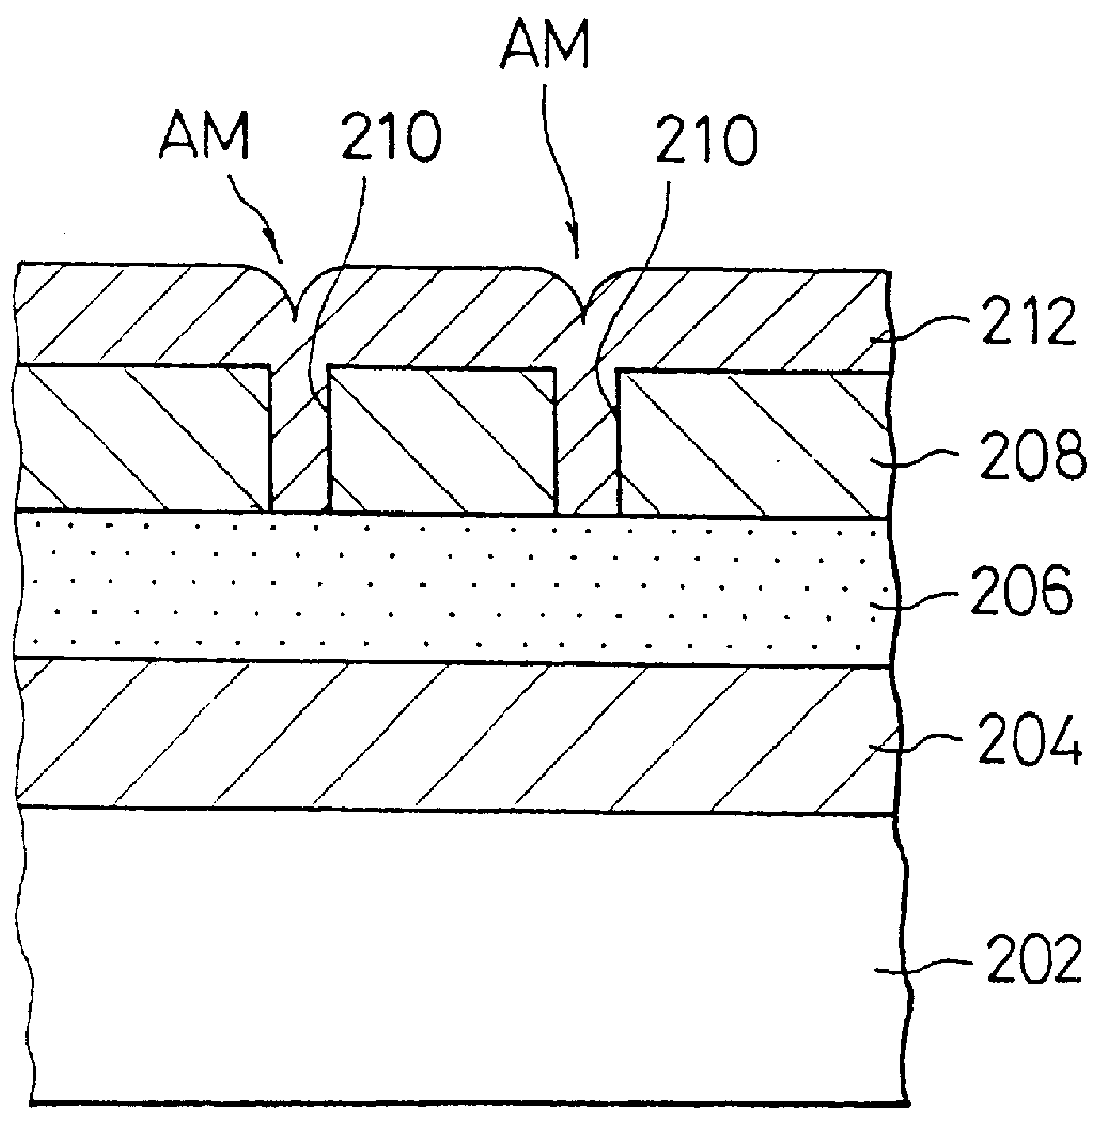 Formation of alignment mark and structure covering the same